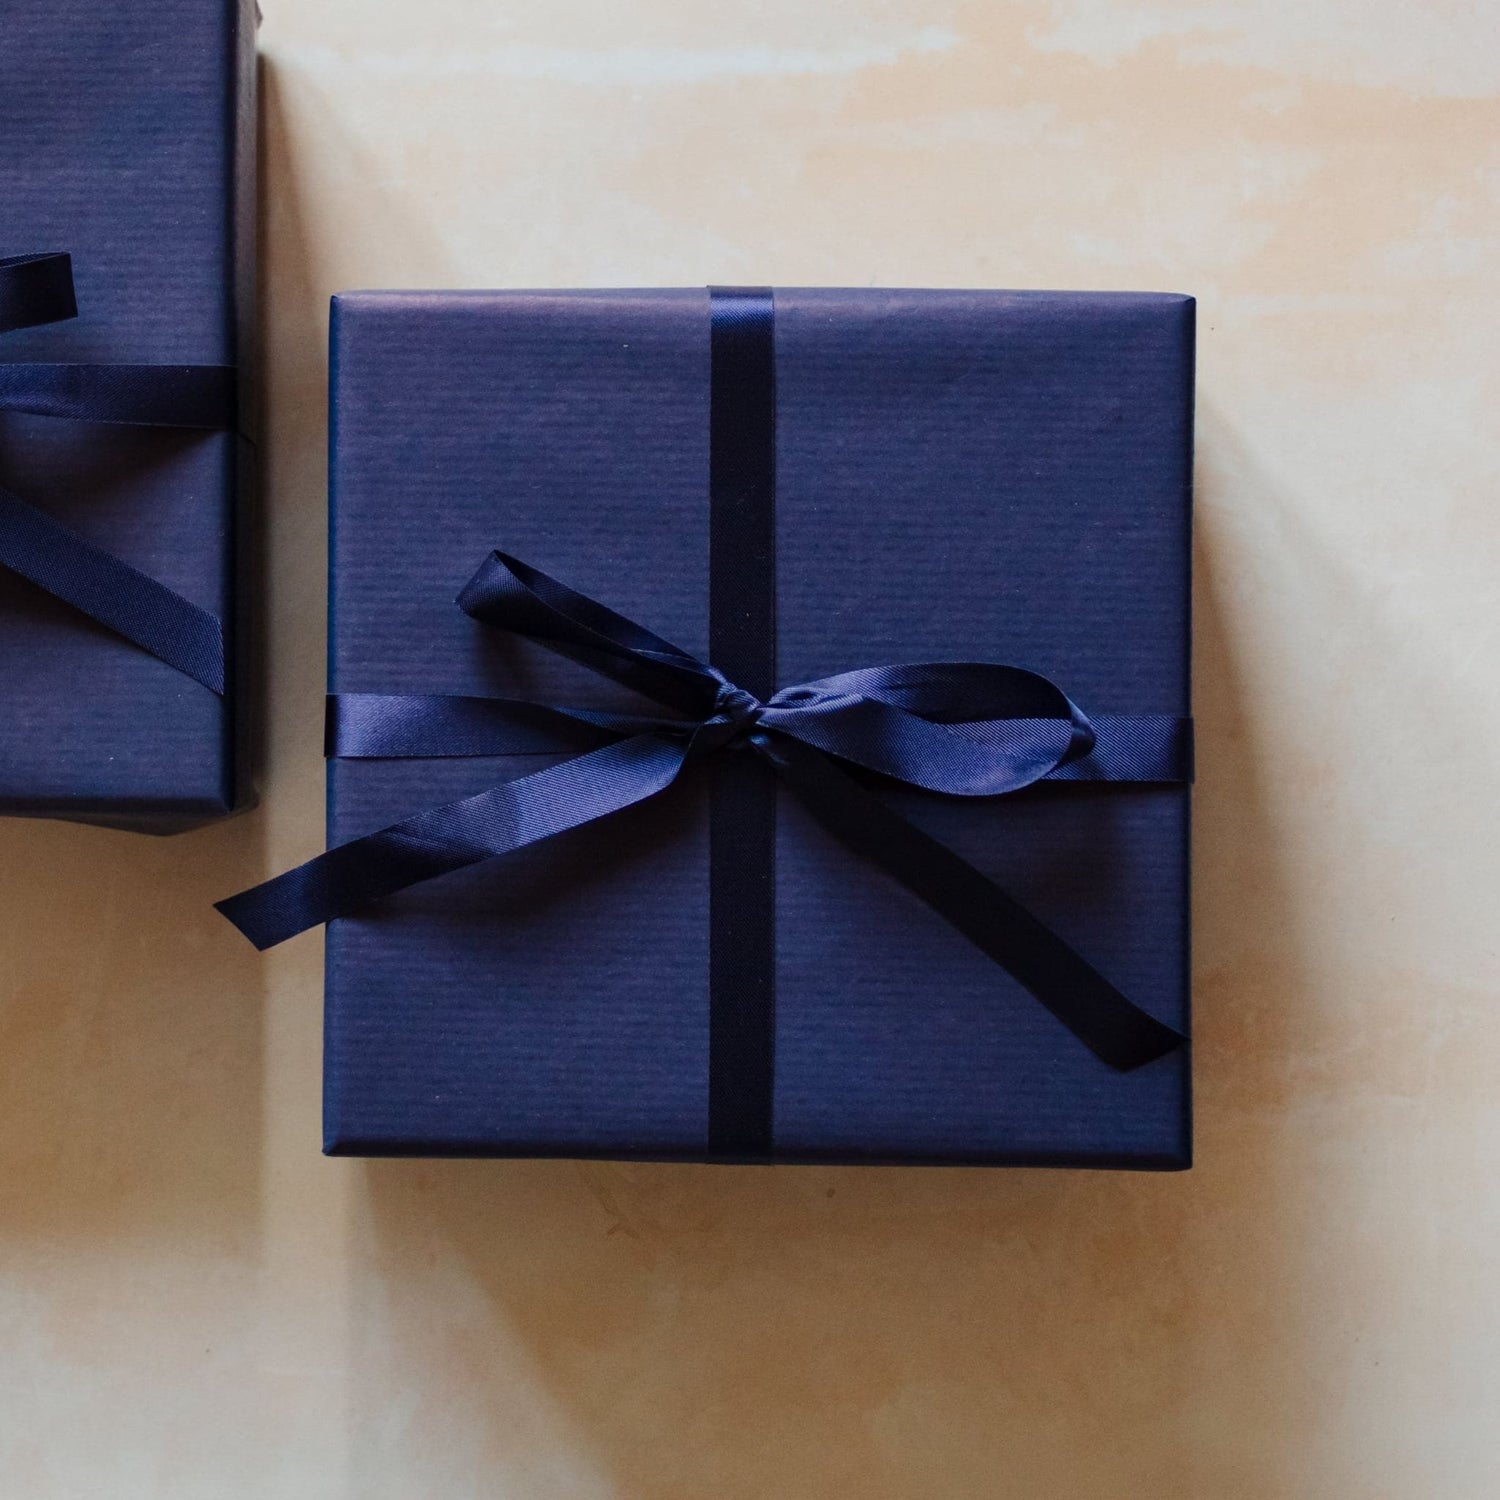 A 400g 3 wick soy candle from the Home County Co. is shown with luxury Gift Wrap. The 3 wick candle is wrapped in luxury navy wrapping paper secured with navy ribbon.